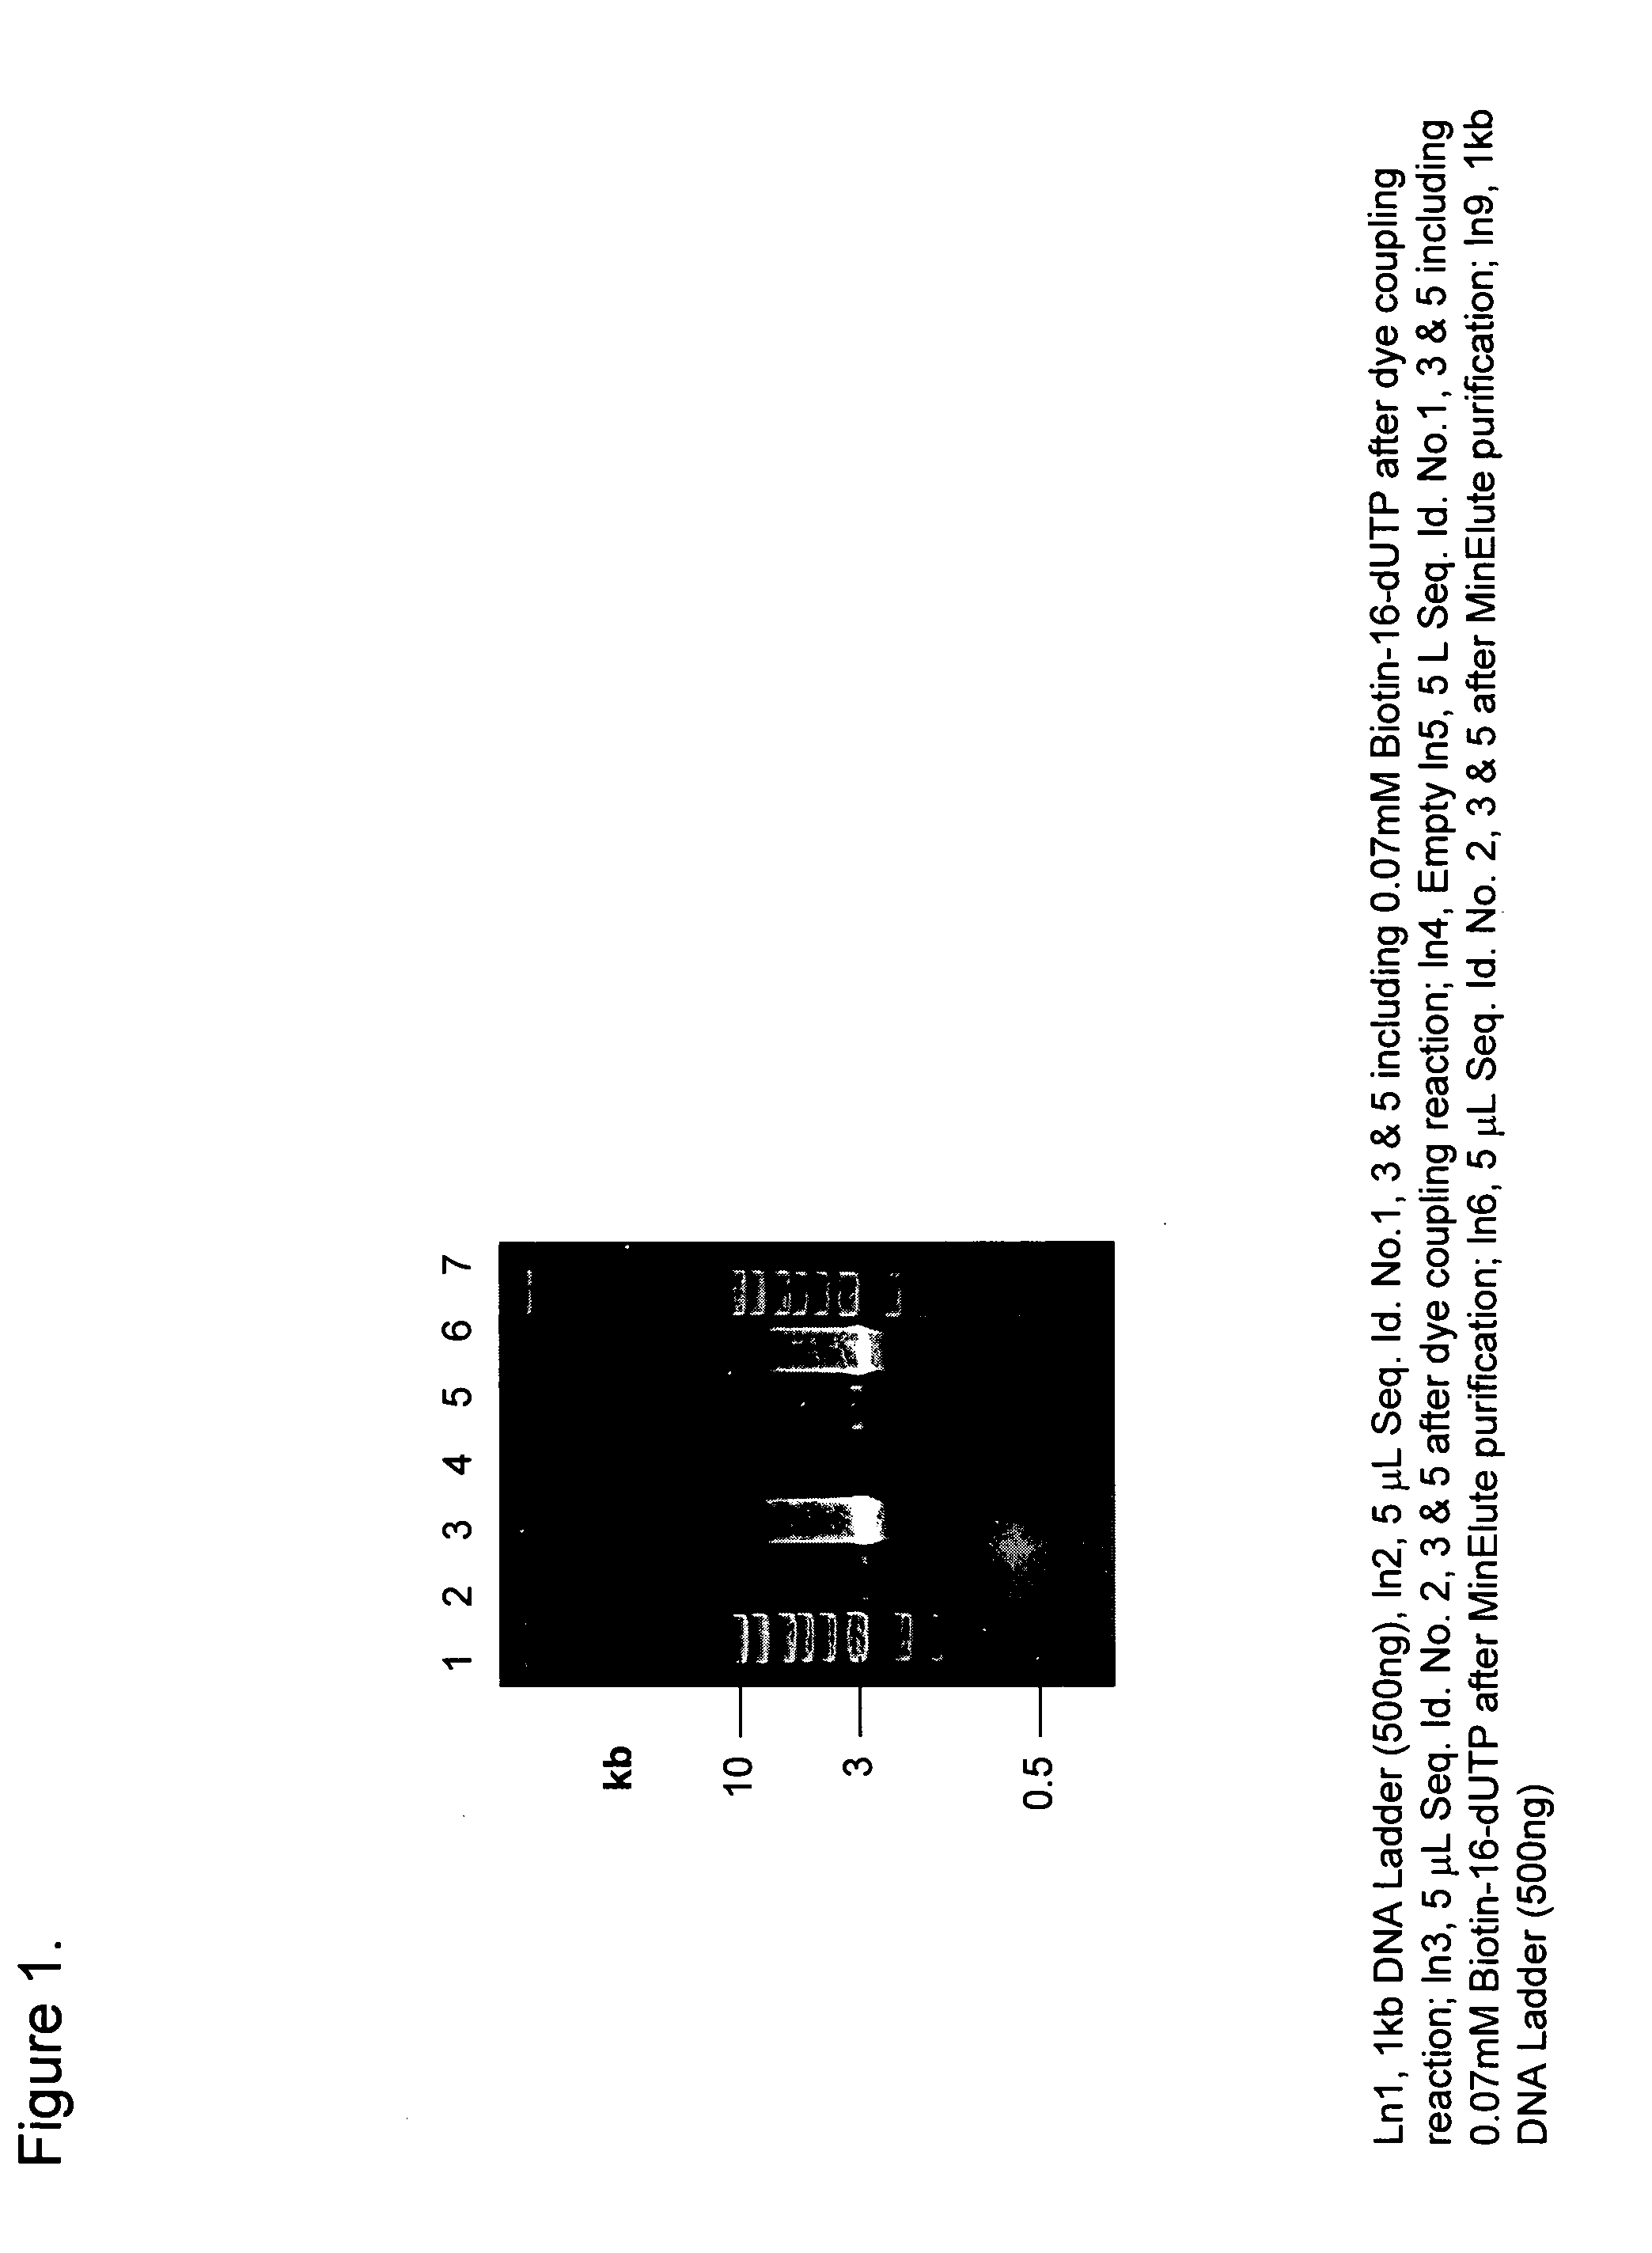 Preparation of defined highly labeled probes